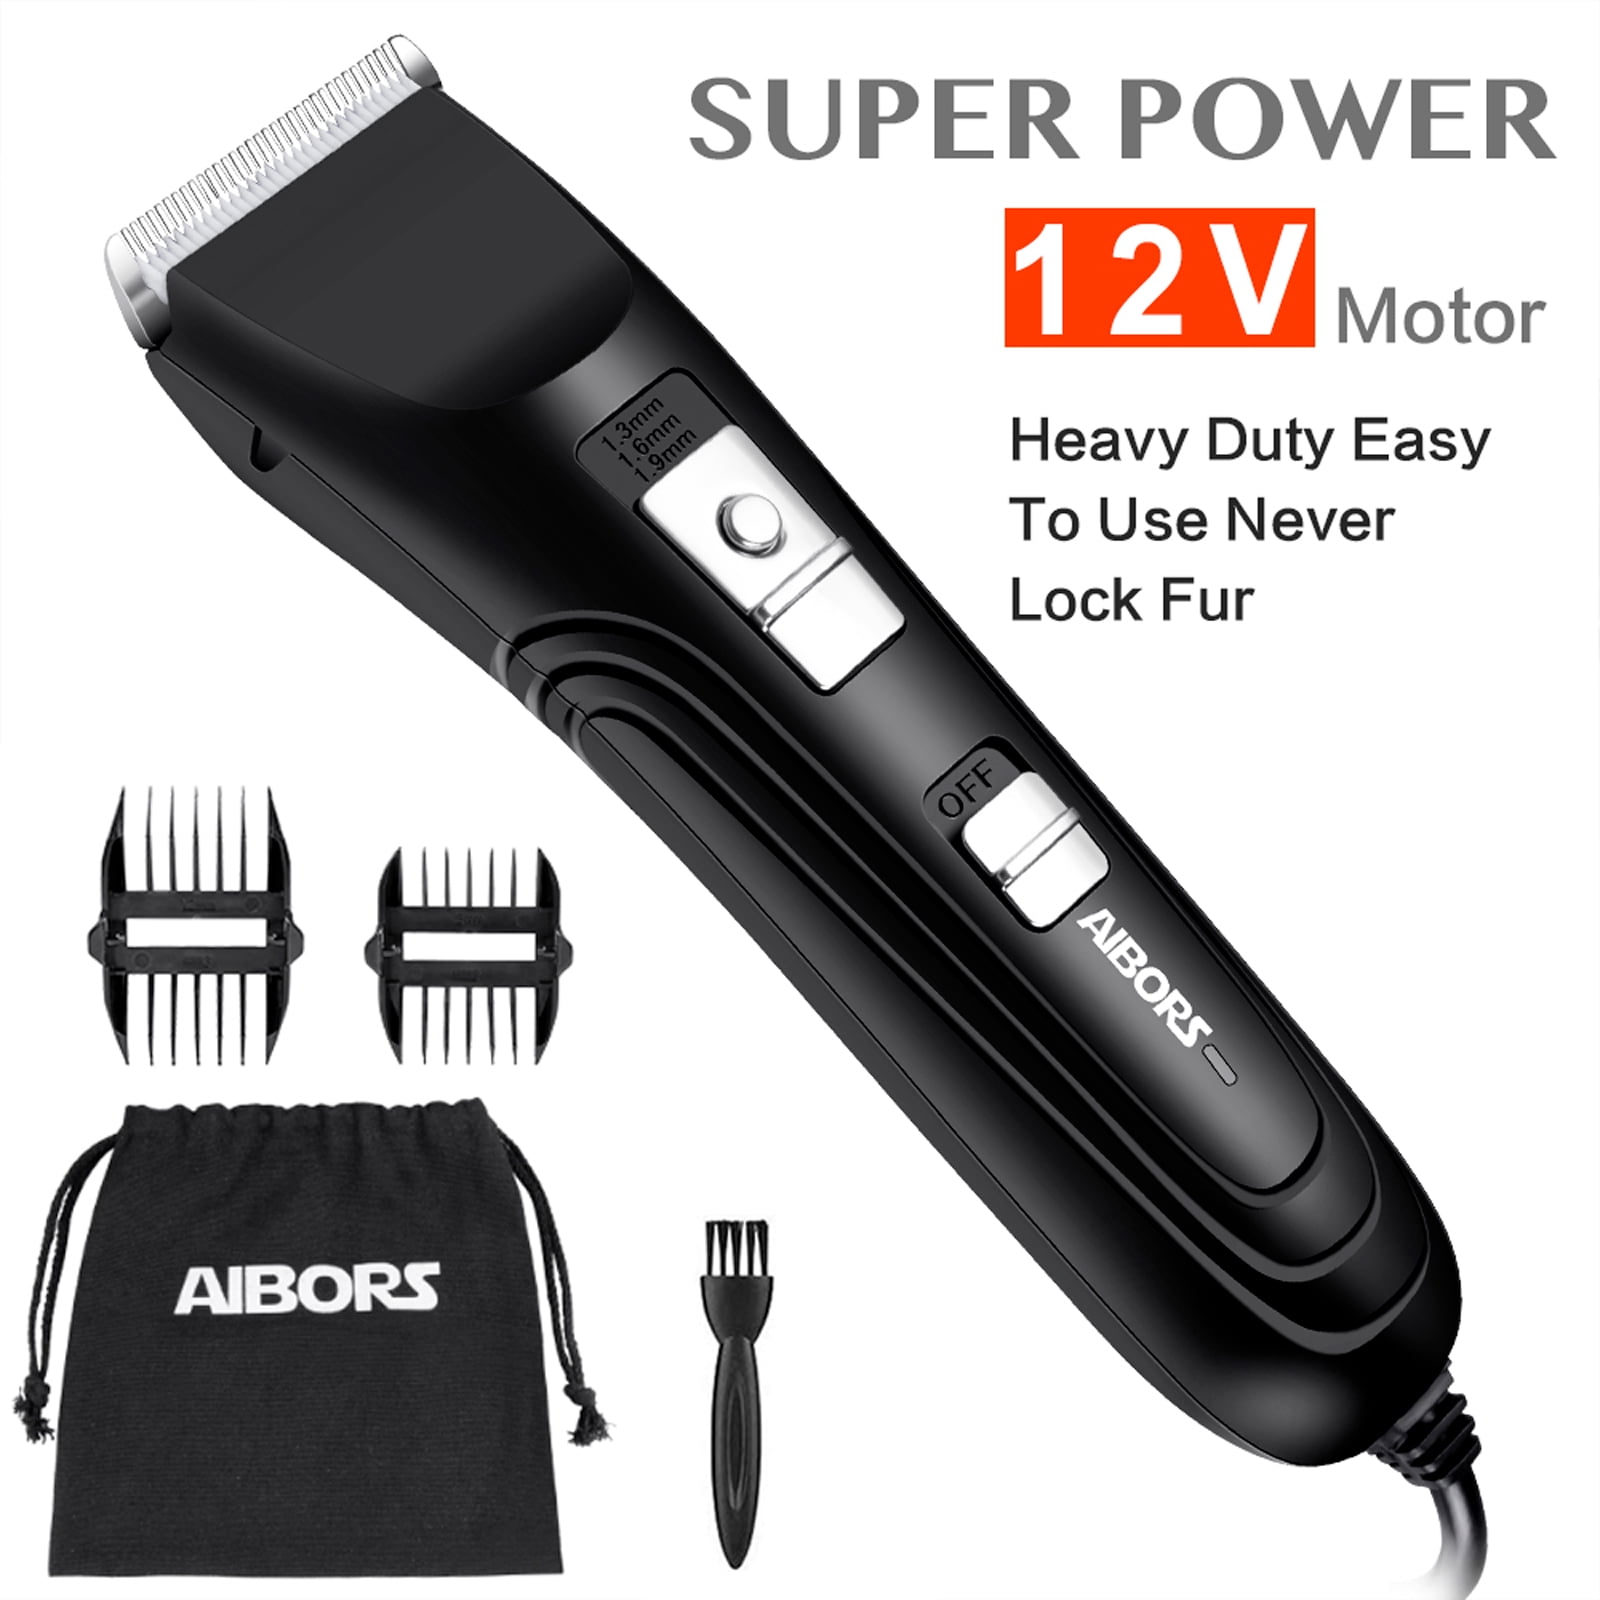 AIBORS Dog Clippers for Grooming for Thick Coats 2-Speed 12V High Power Professional Heavy Duty Quiet Plug-in Dog Grooming Clippers Kit Dog Shaver Hair Trimmers for Cats and Other Pets 